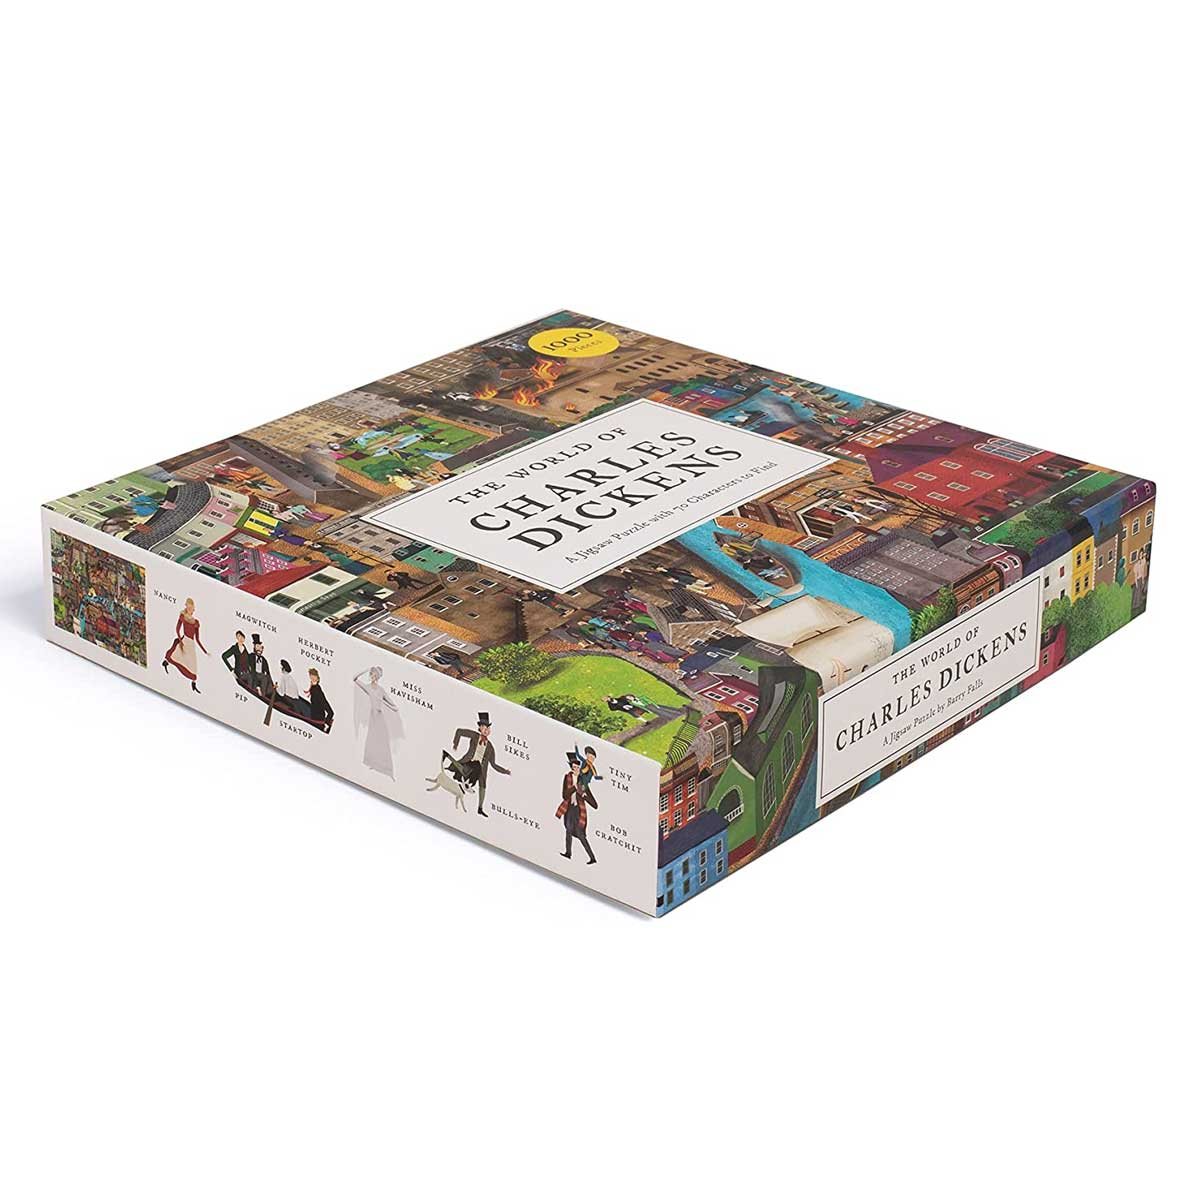 World Of Charles Dickens 1000 Piece Jigsaw Puzzle